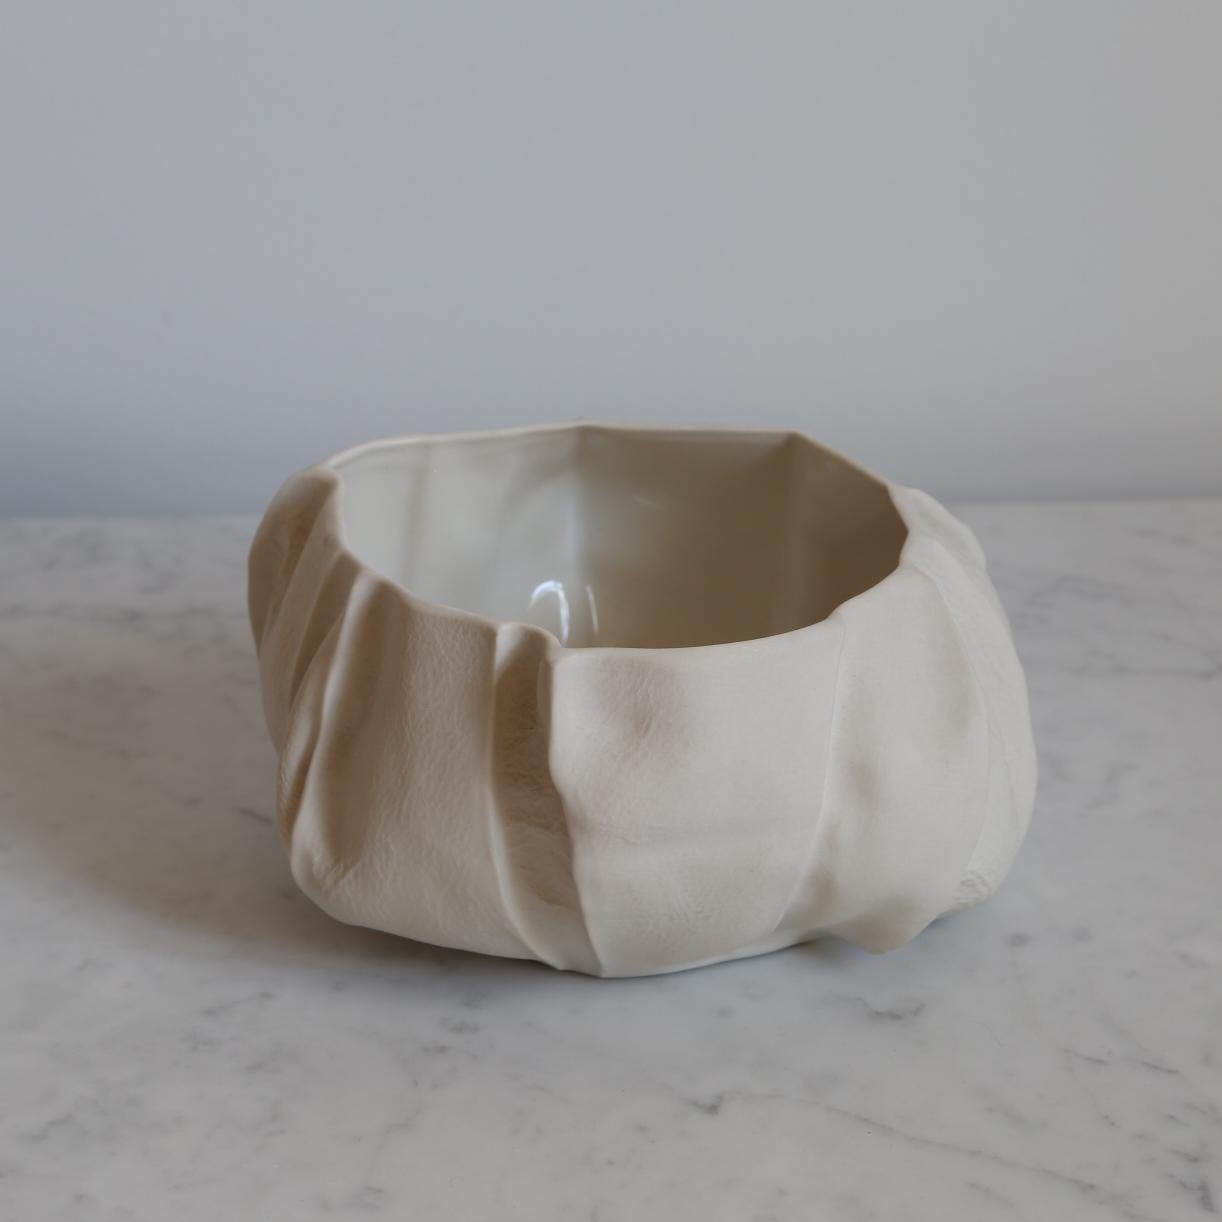 Modern One of a Kind Kawa Bowl by Luft Tanaka, Ceramic, Porcelain, in Stock